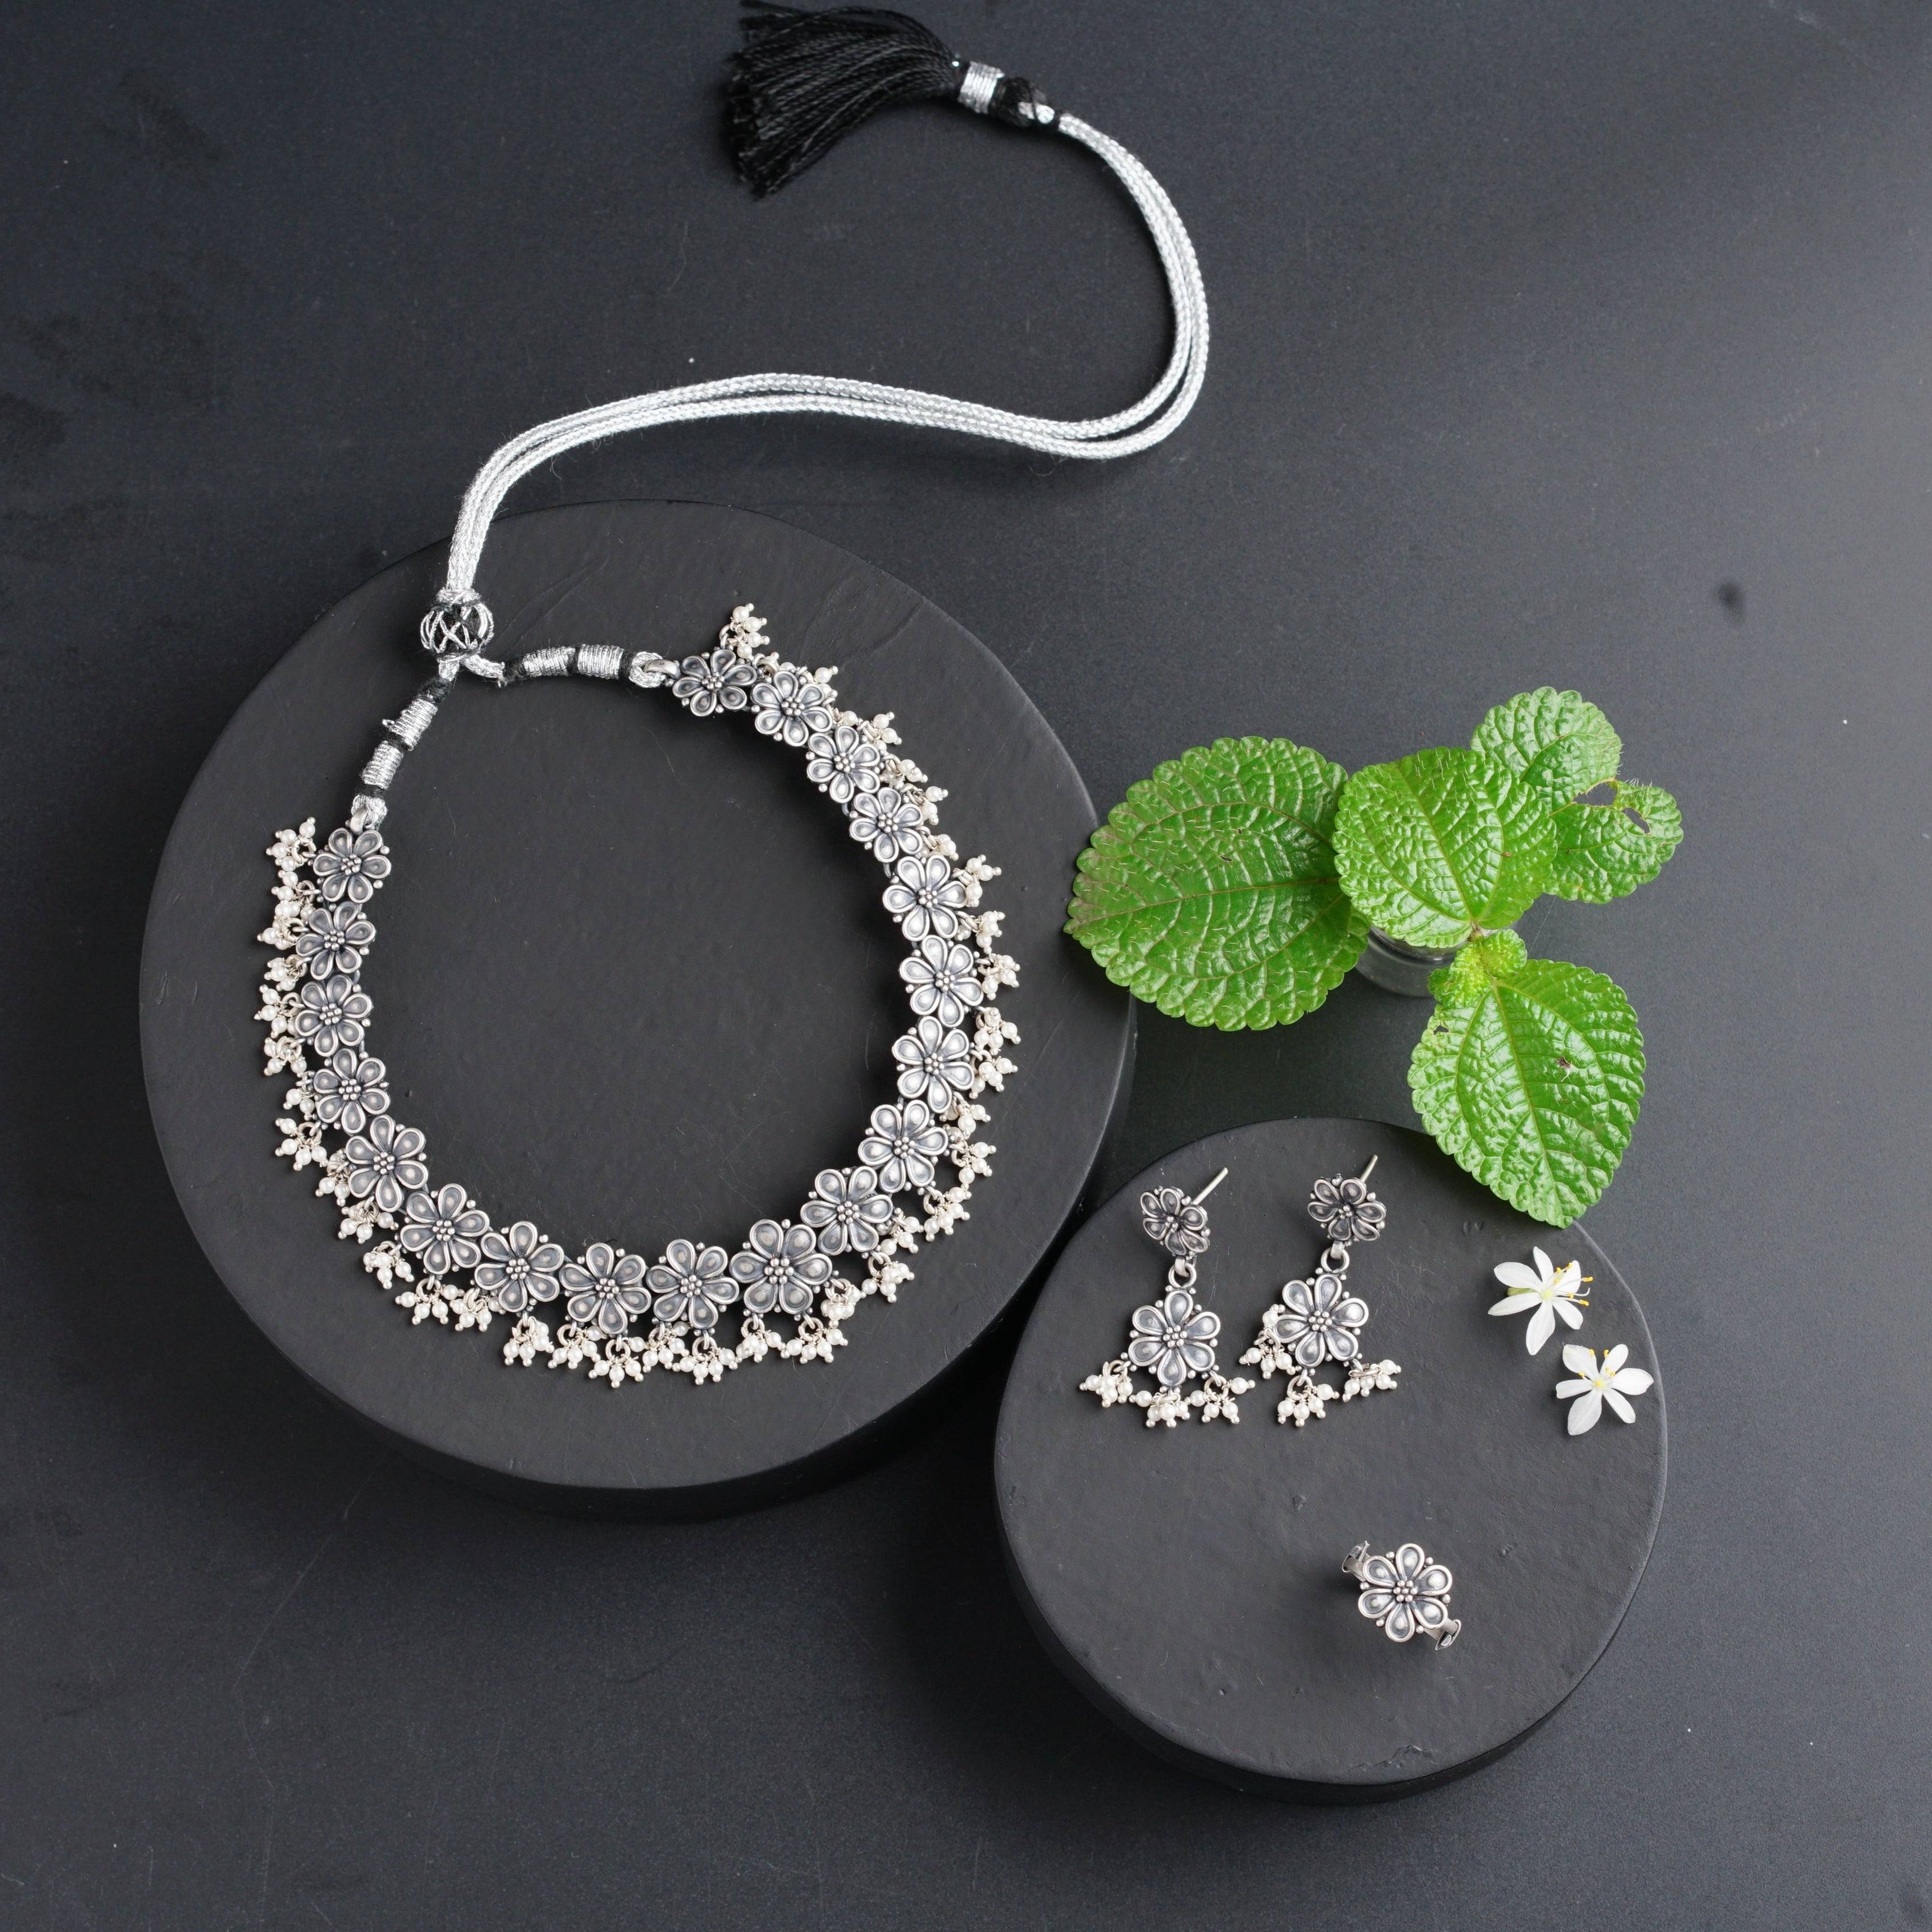 a necklace, earrings and a leaf on a black plate